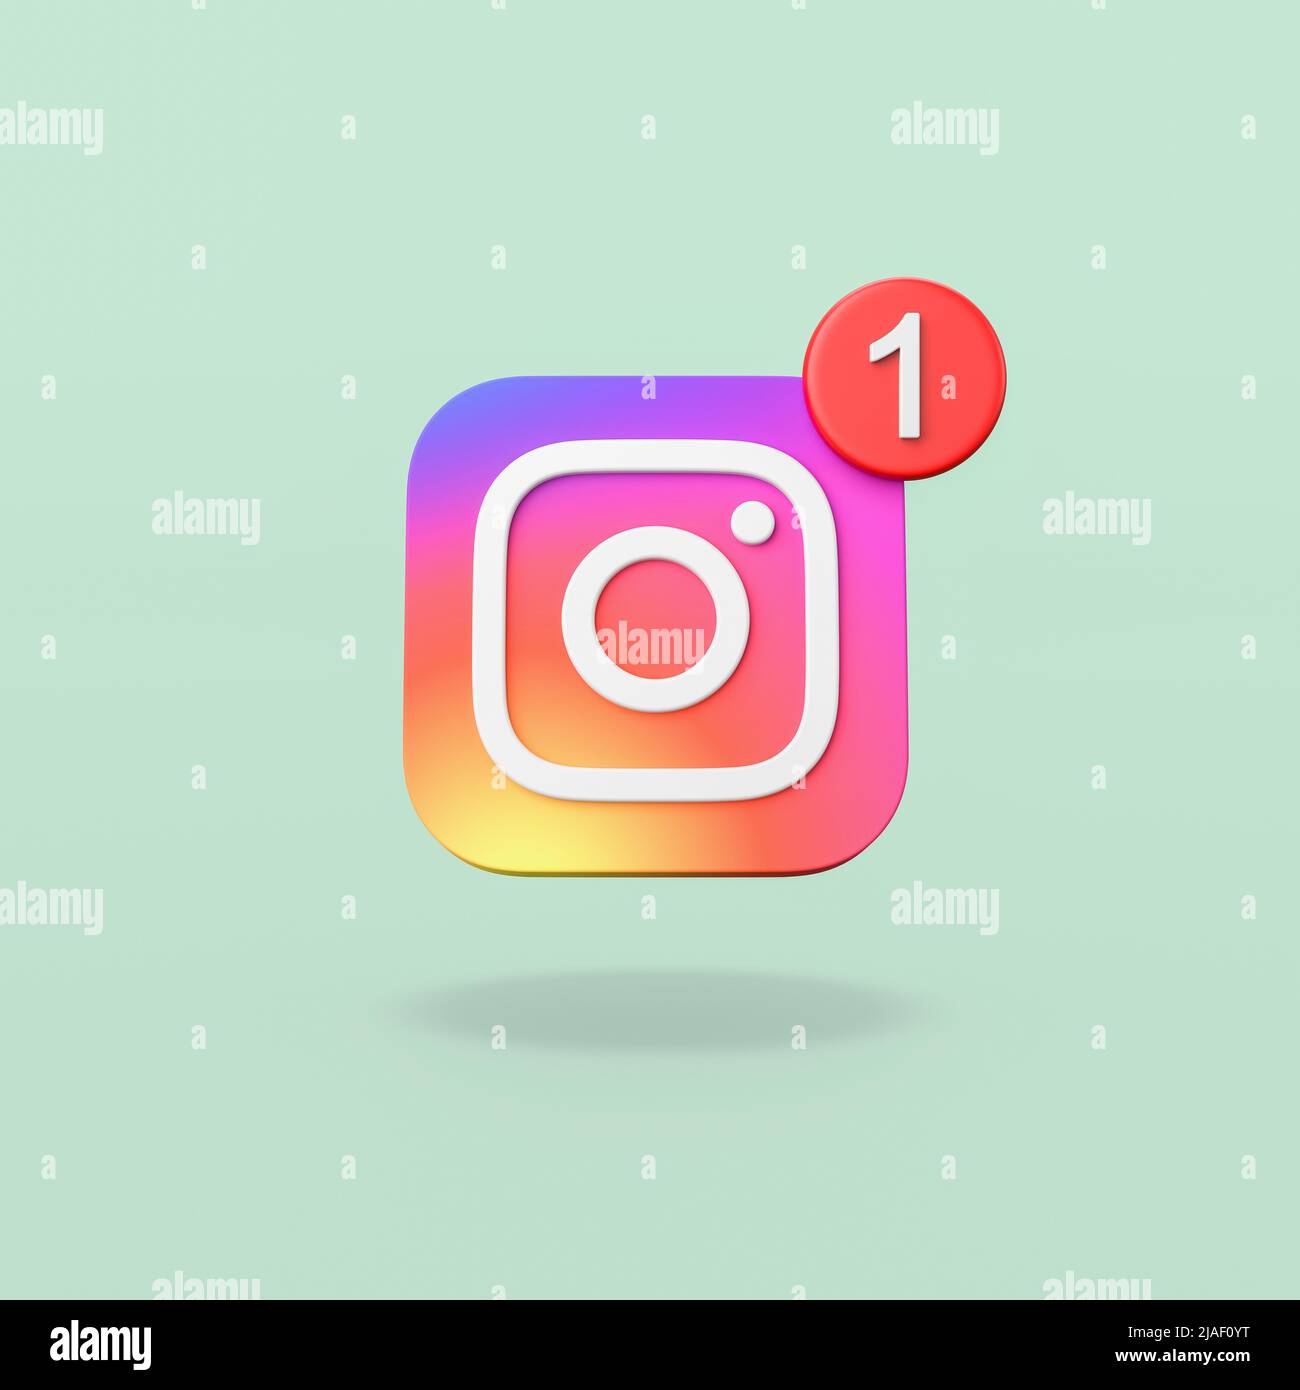 Instagram Logo with 1 Notification on Green Background Stock Photo